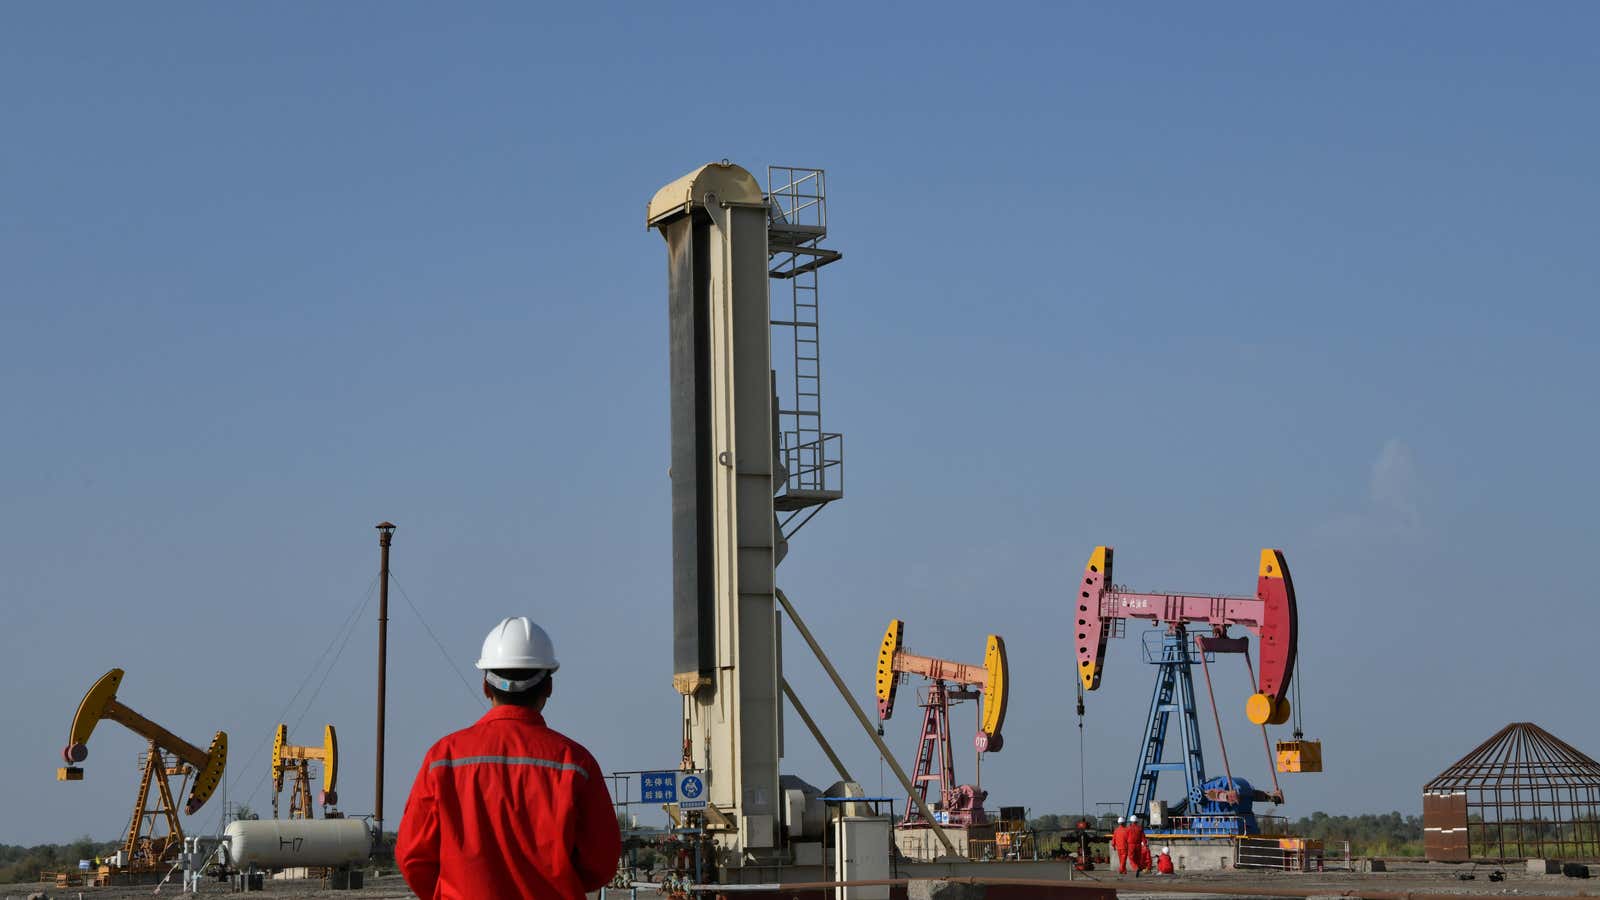 Workers are seen near pumpjacks at a China National Petroleum Corp (CNPC) oil field in Bayingol, Xinjiang Uighur Autonomous Region, China August 7, 2019. Picture…